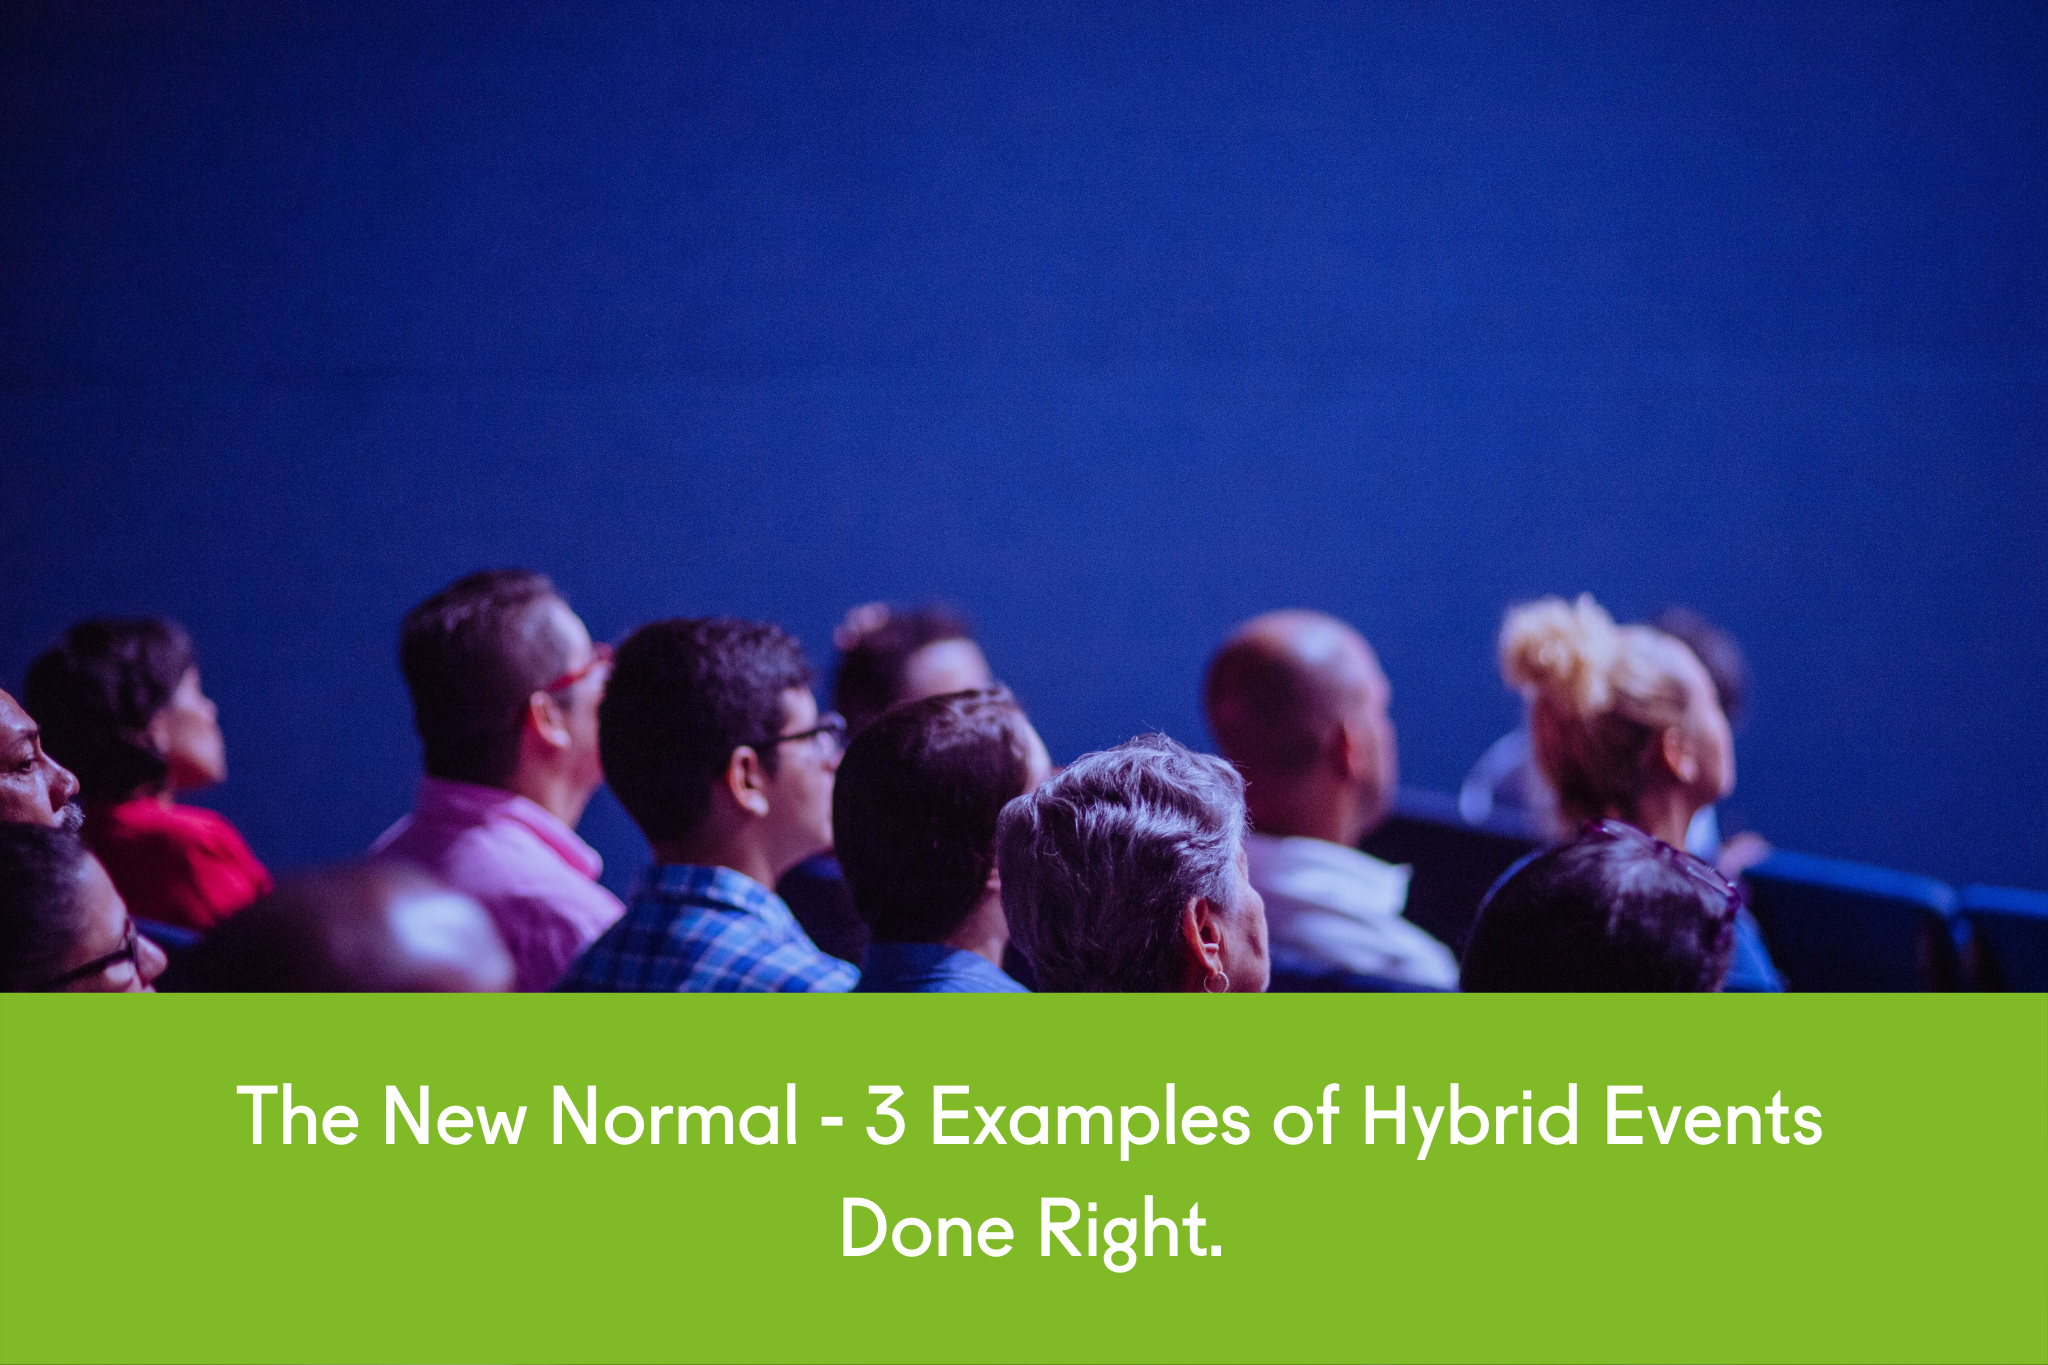 The New Normal - 3 Examples of Hybrid Events Done Right.